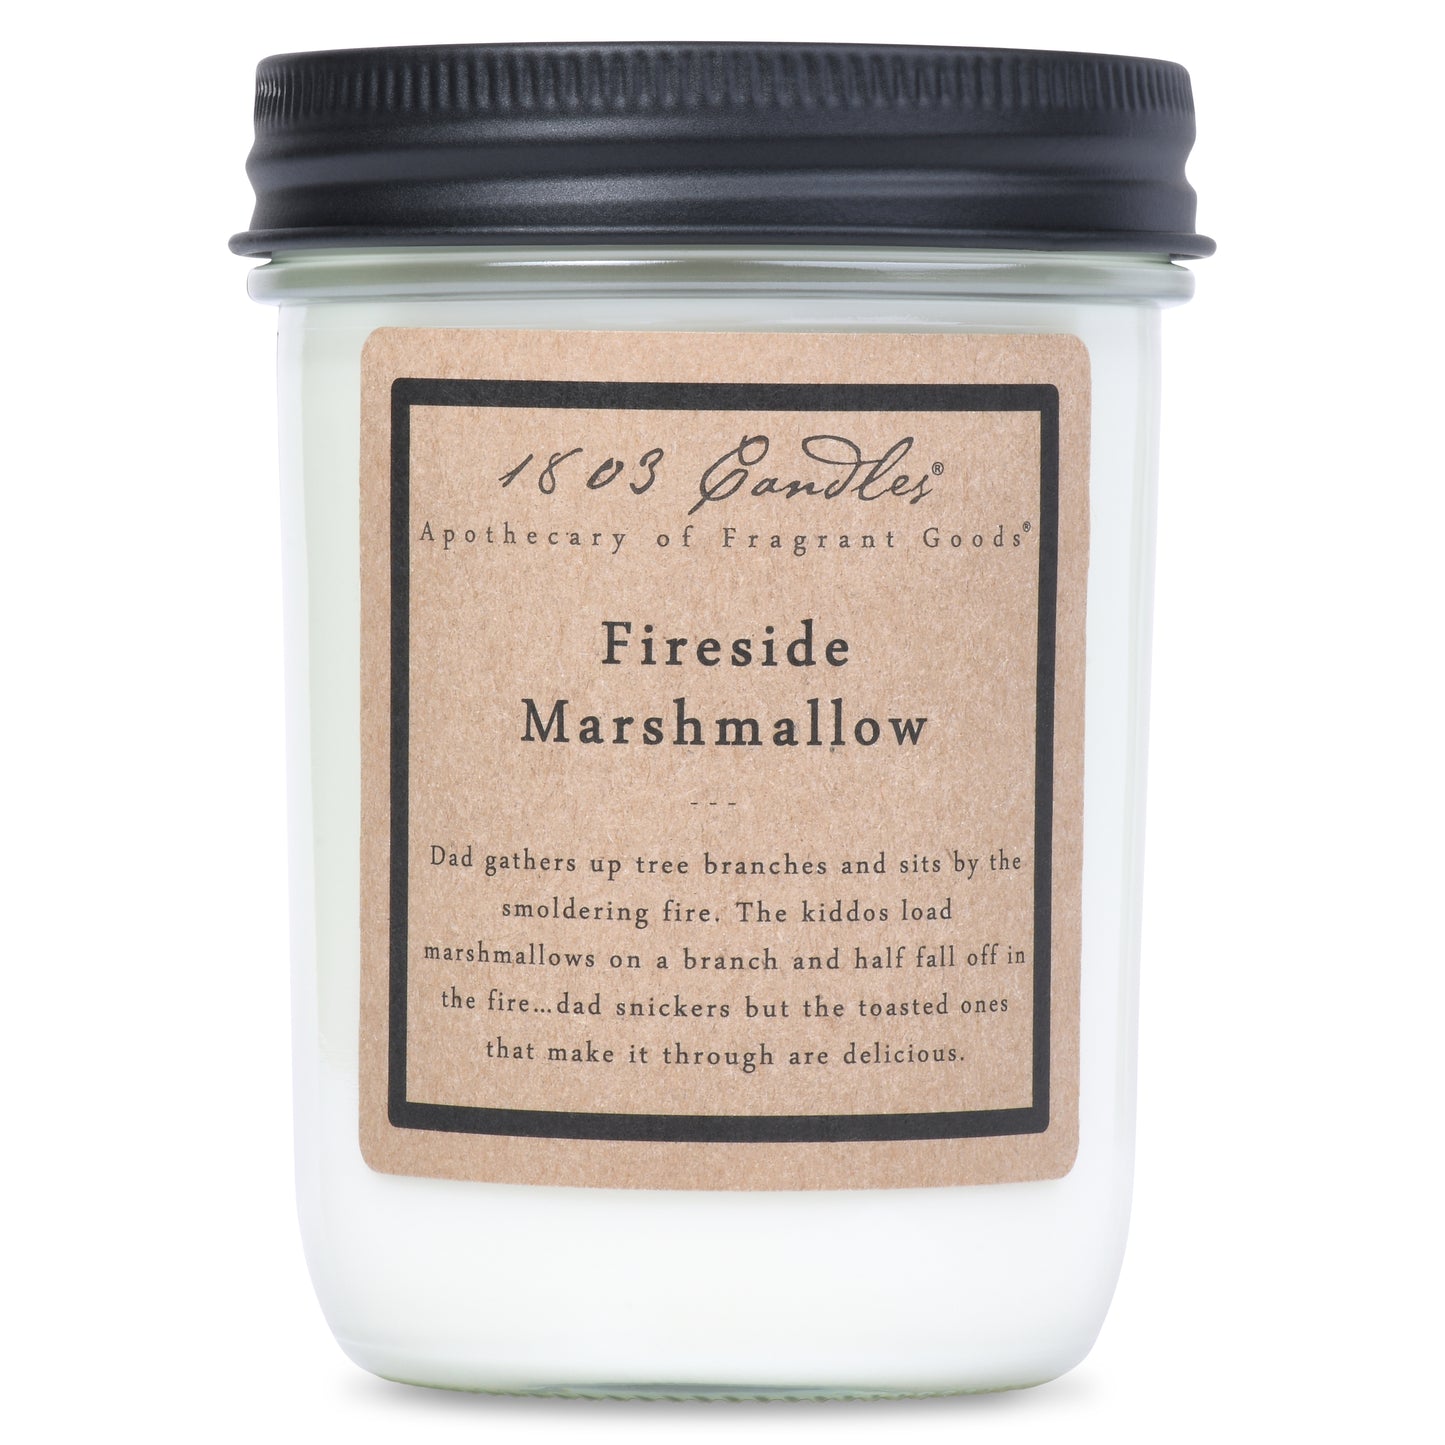 1803 Candles: Fireside Marshmallow 14oz. Jar Candle